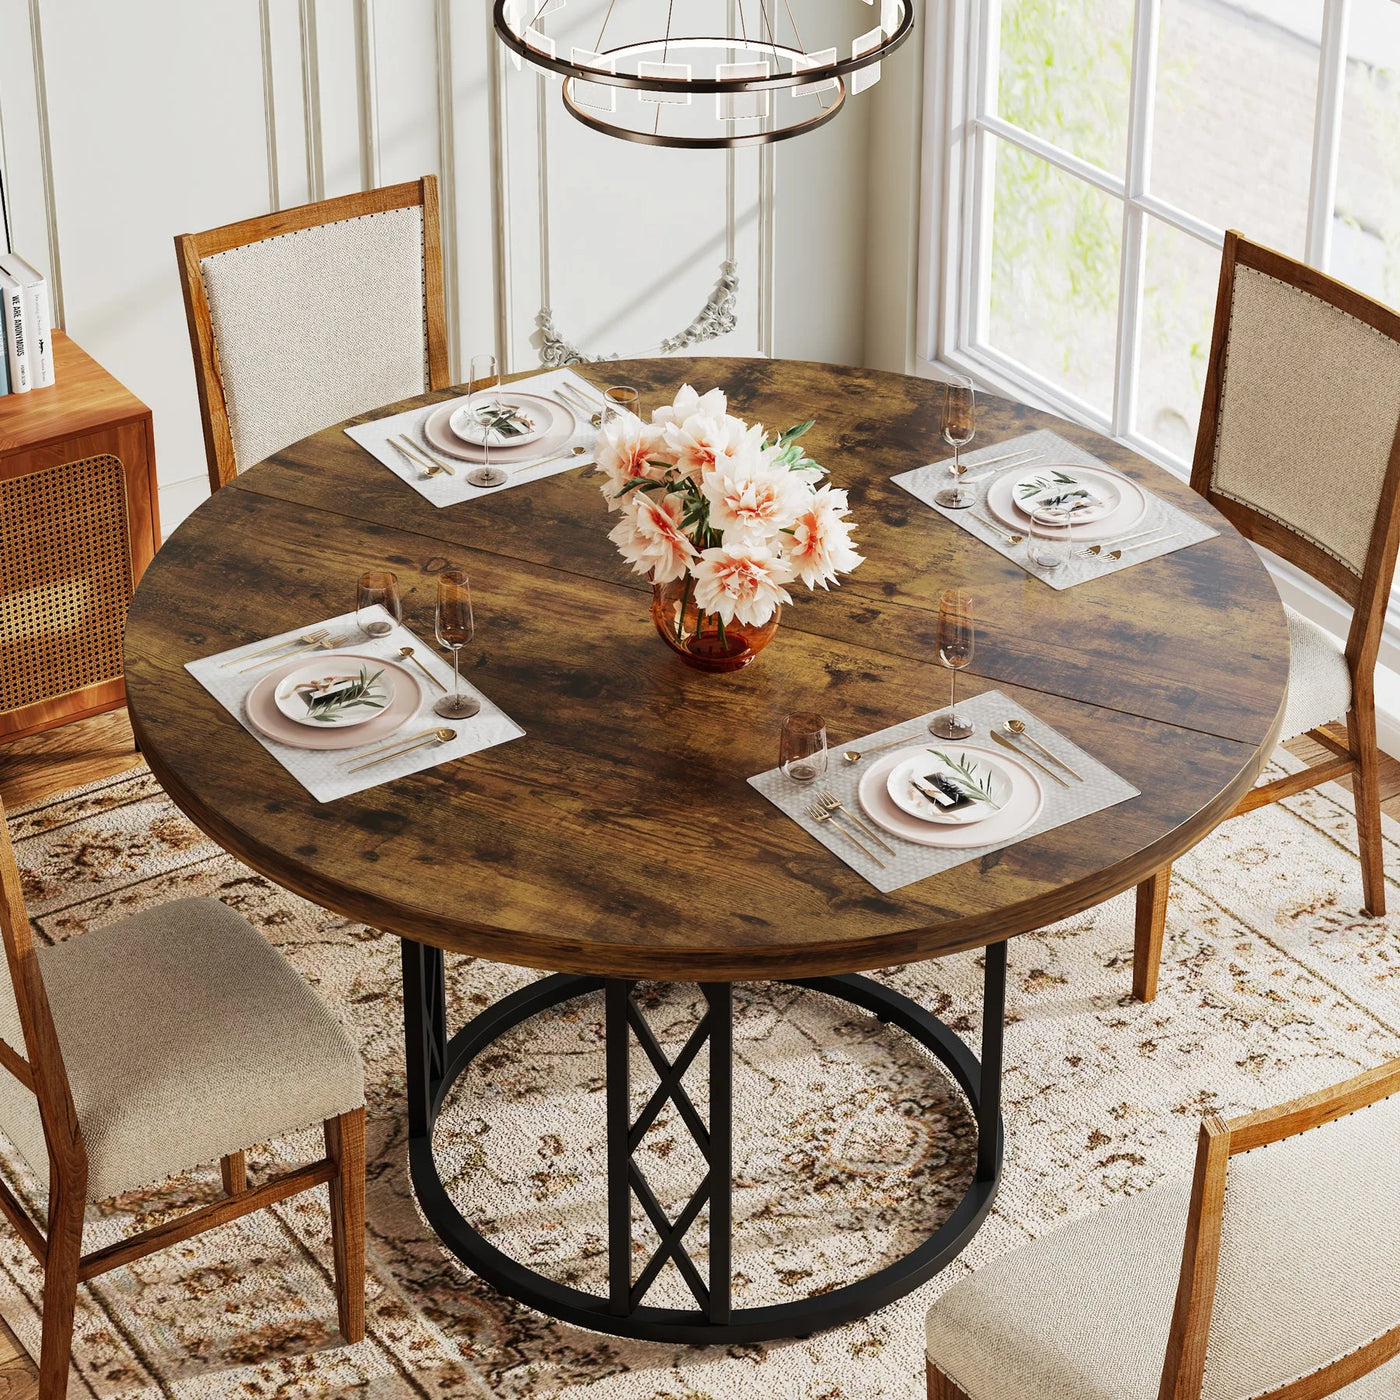 Maurice Round Dining Table for 4 People | 47" Circular Kitchen Table with Metal Base